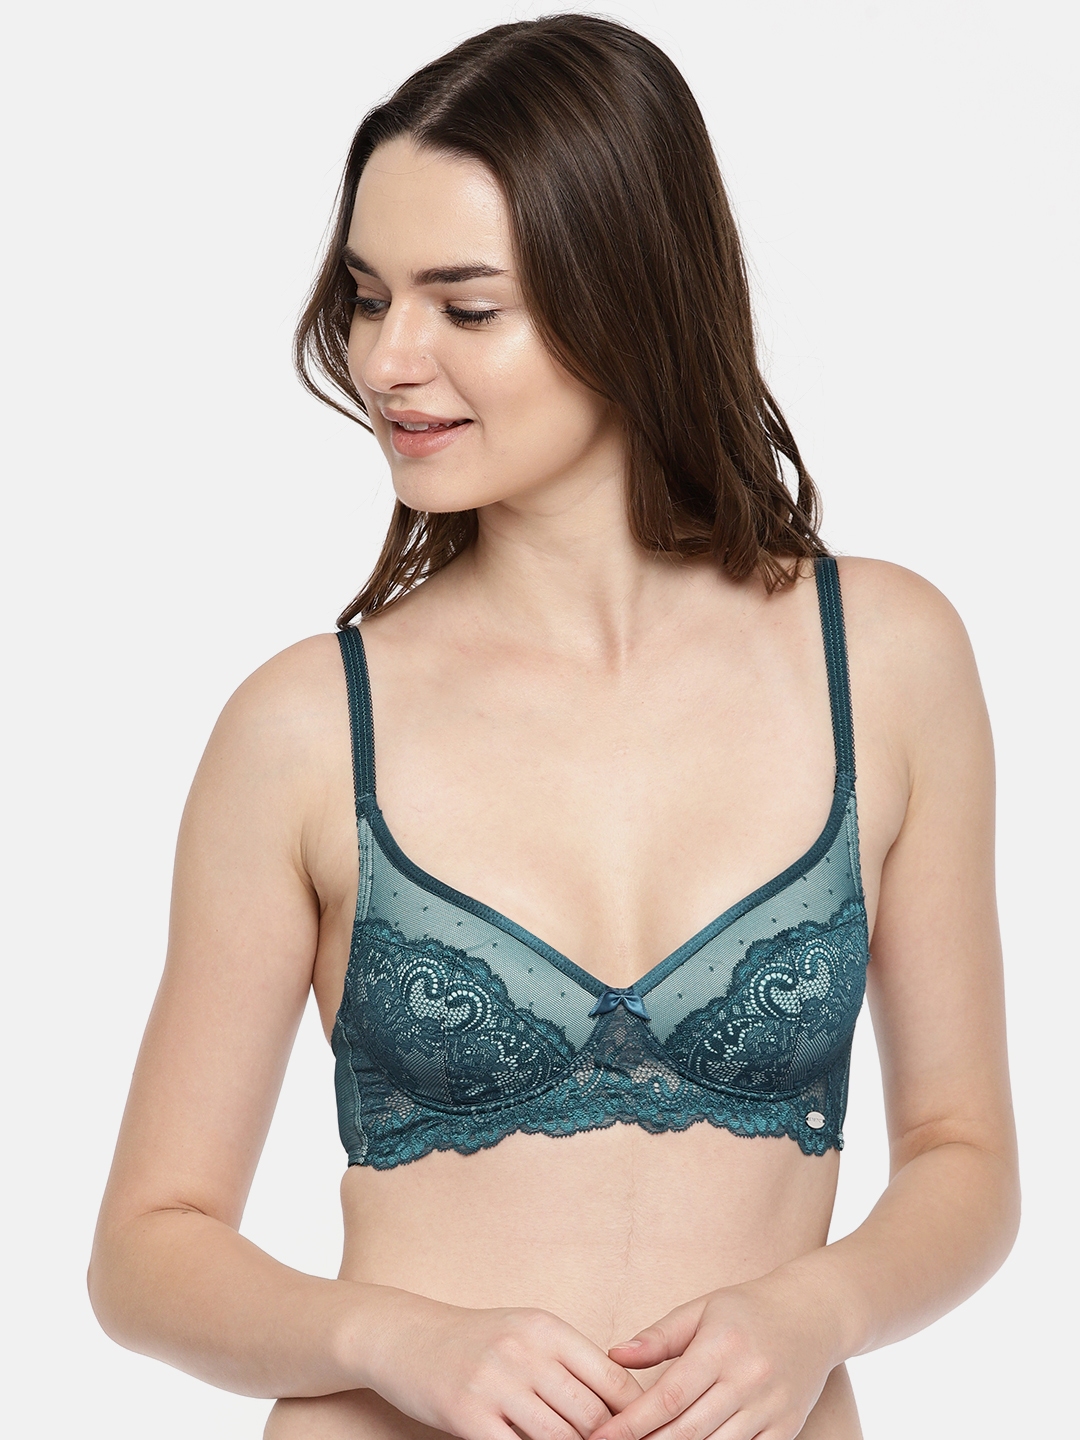 Buy Enamor Teal Blue Lace Lightly Padded Non Wired Medium Coverage